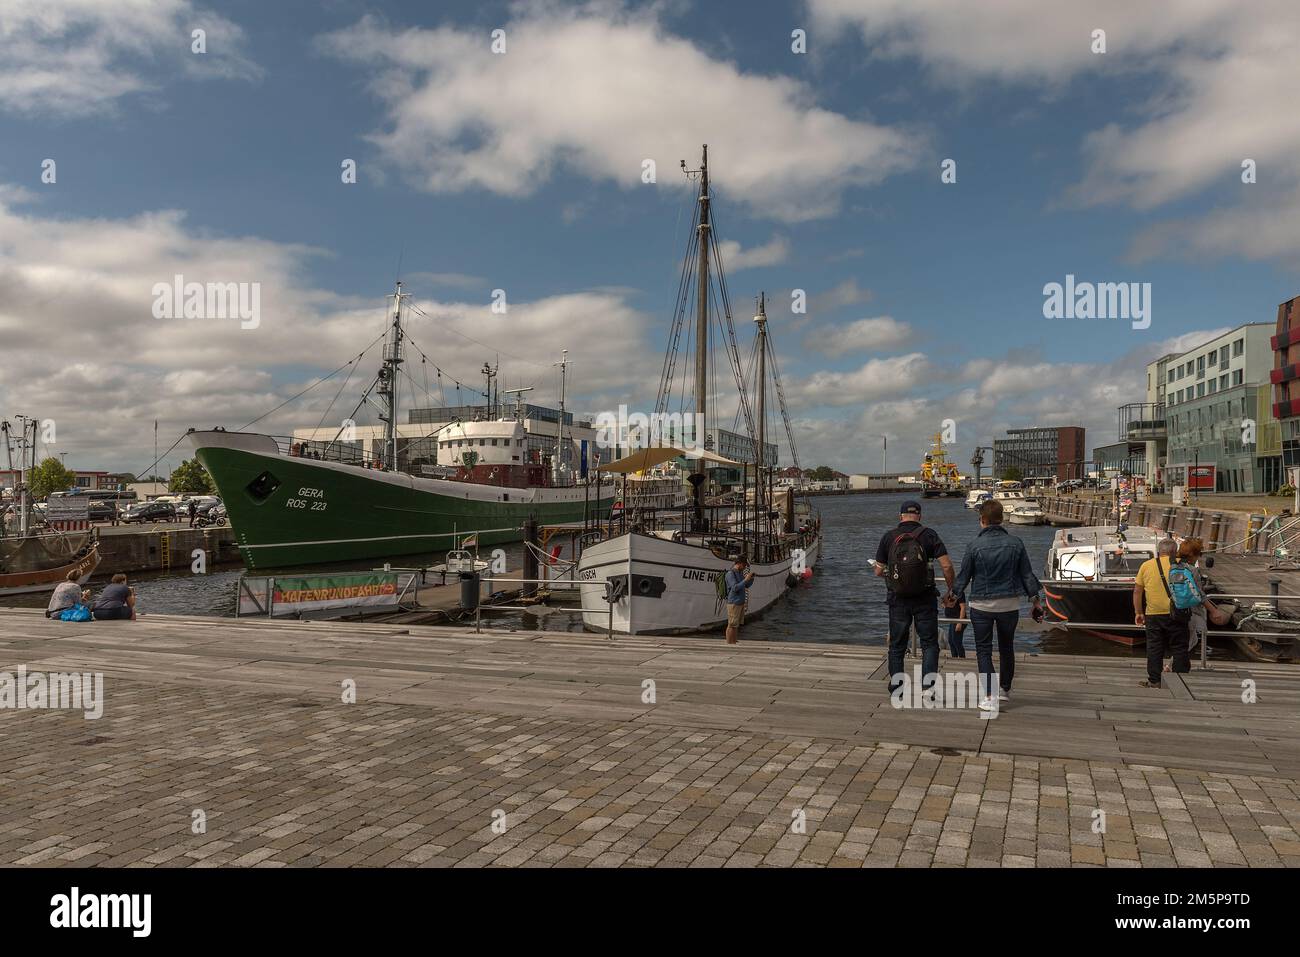 Museum ship in the fishing port of Bremerhaven, Germany Stock Photo